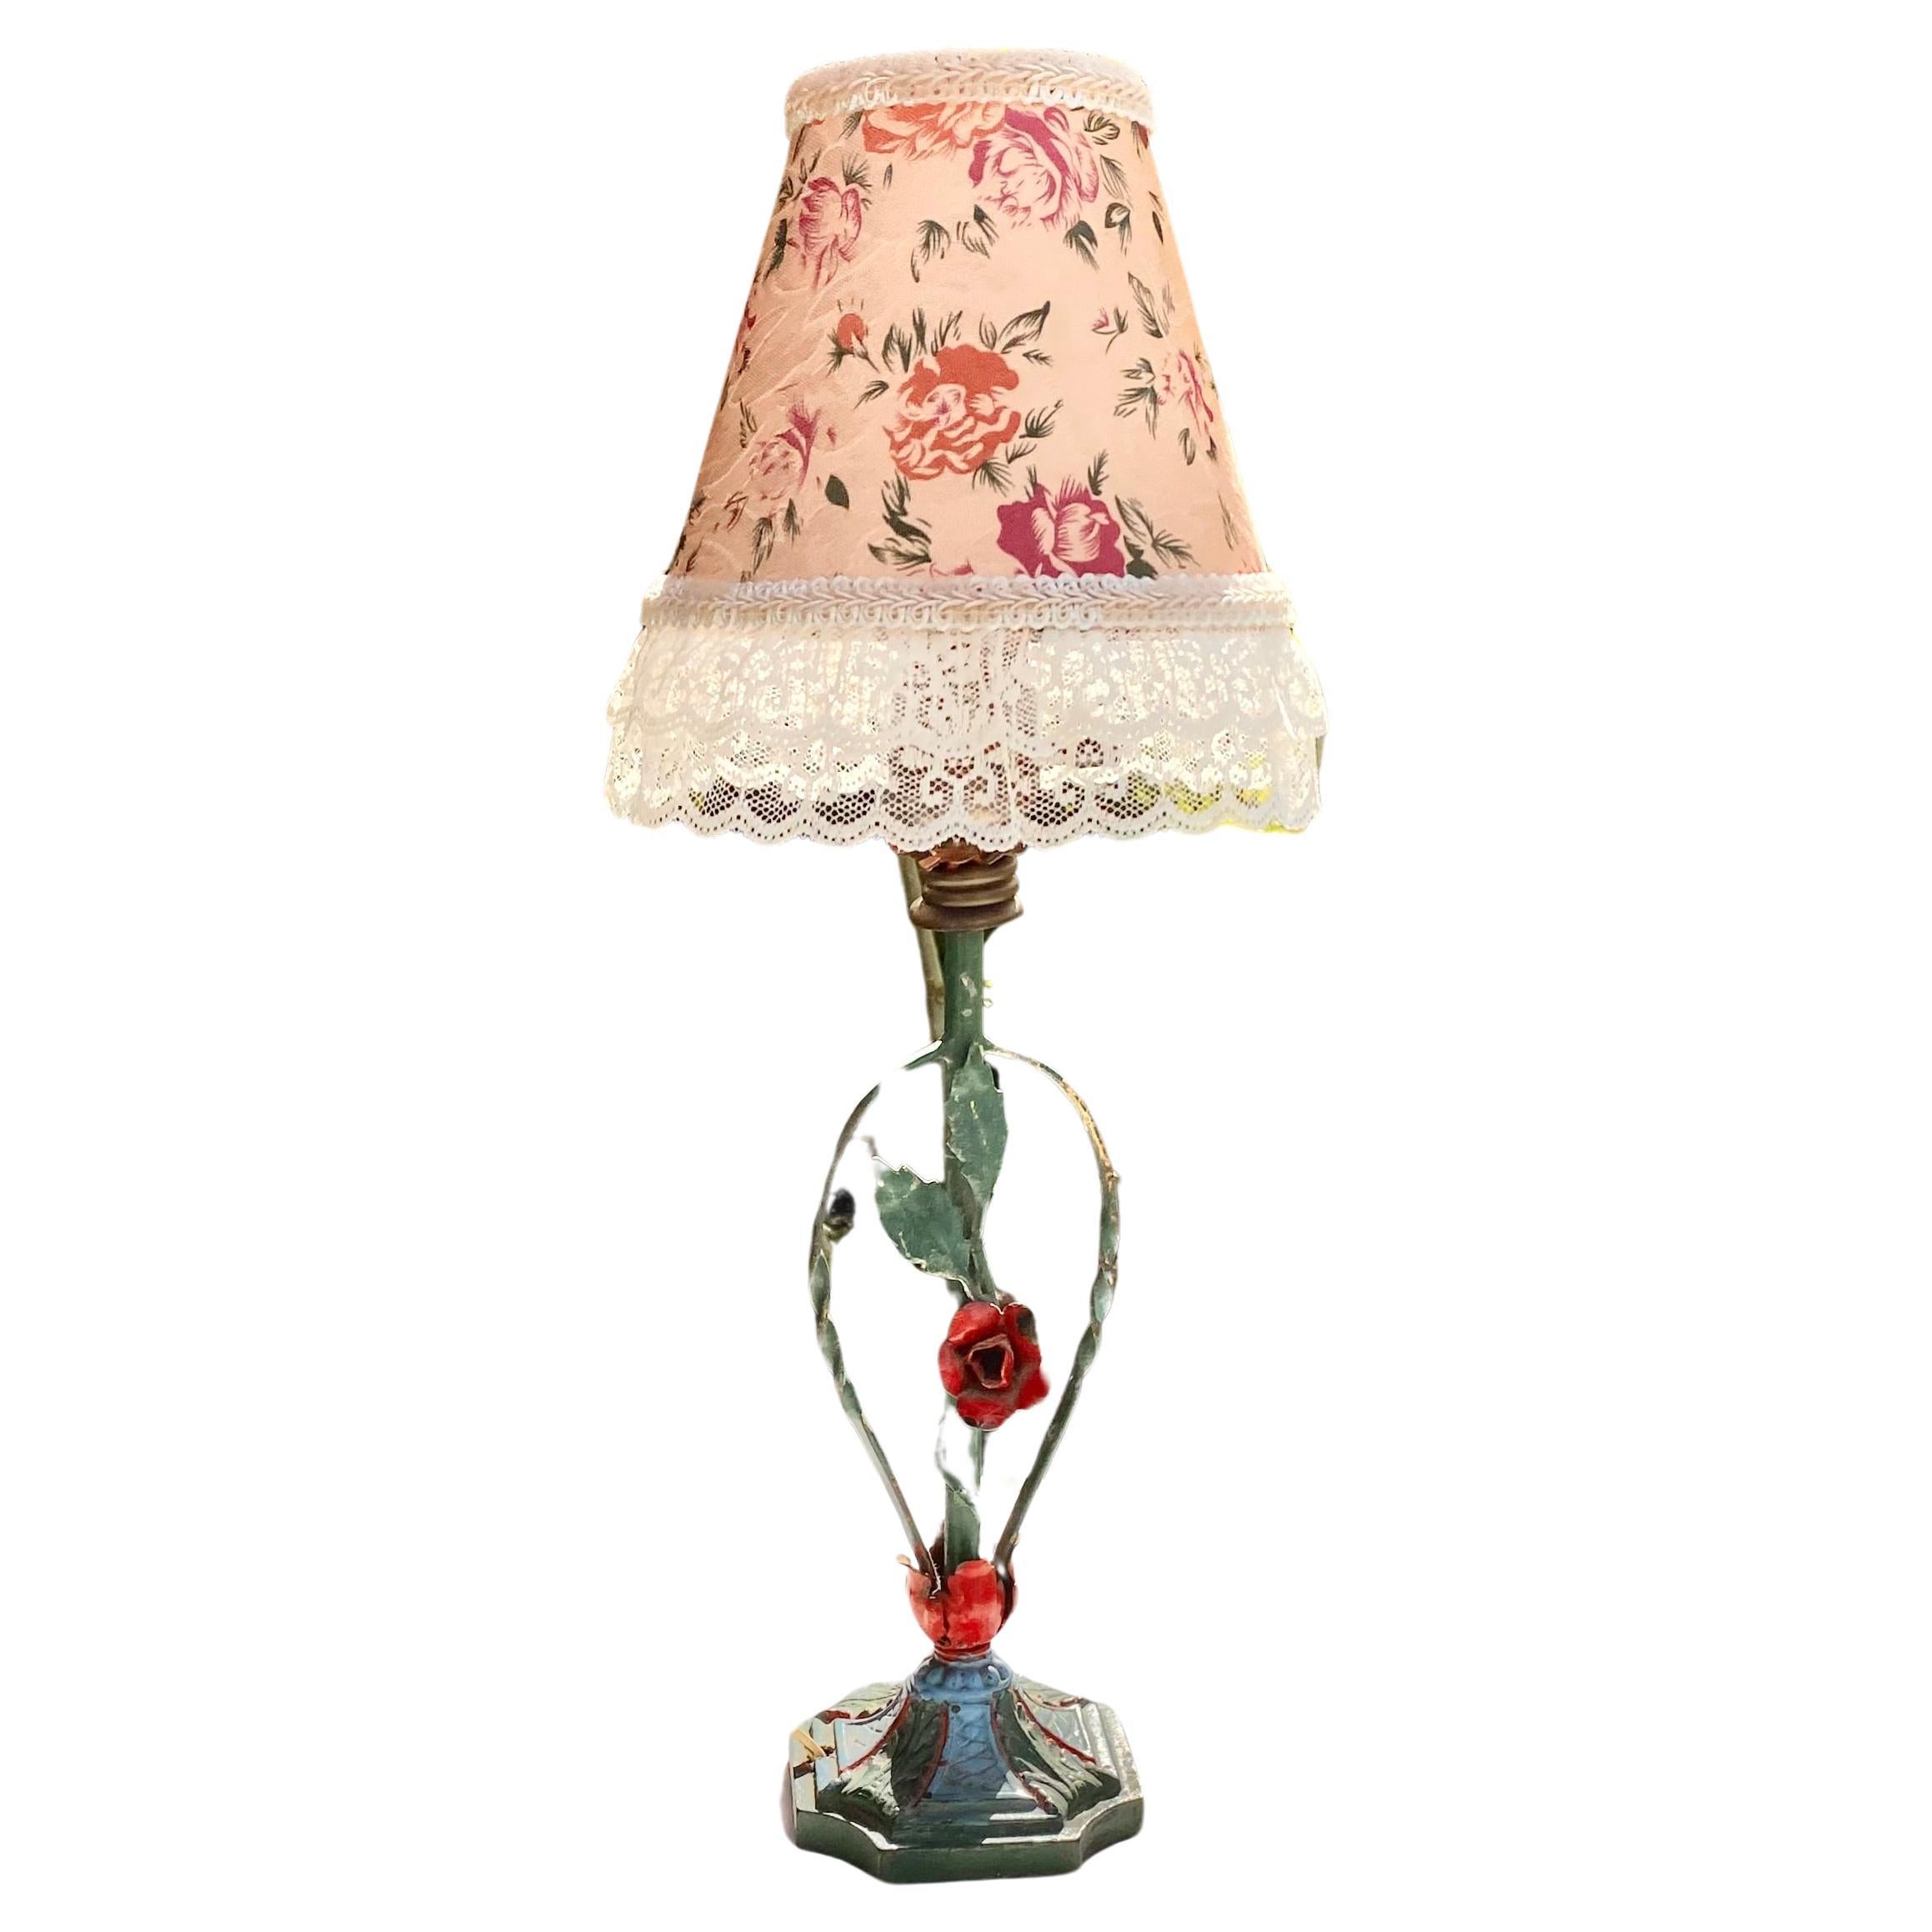 A vintage 1940’s Flower tole lamp with an embossed floral hardback clip on shade with lovely lace and gimp trim. This lamp could work in so many places in so many styles of rooms. Simply classic! Cast iron painted base leads to a lovely red flower